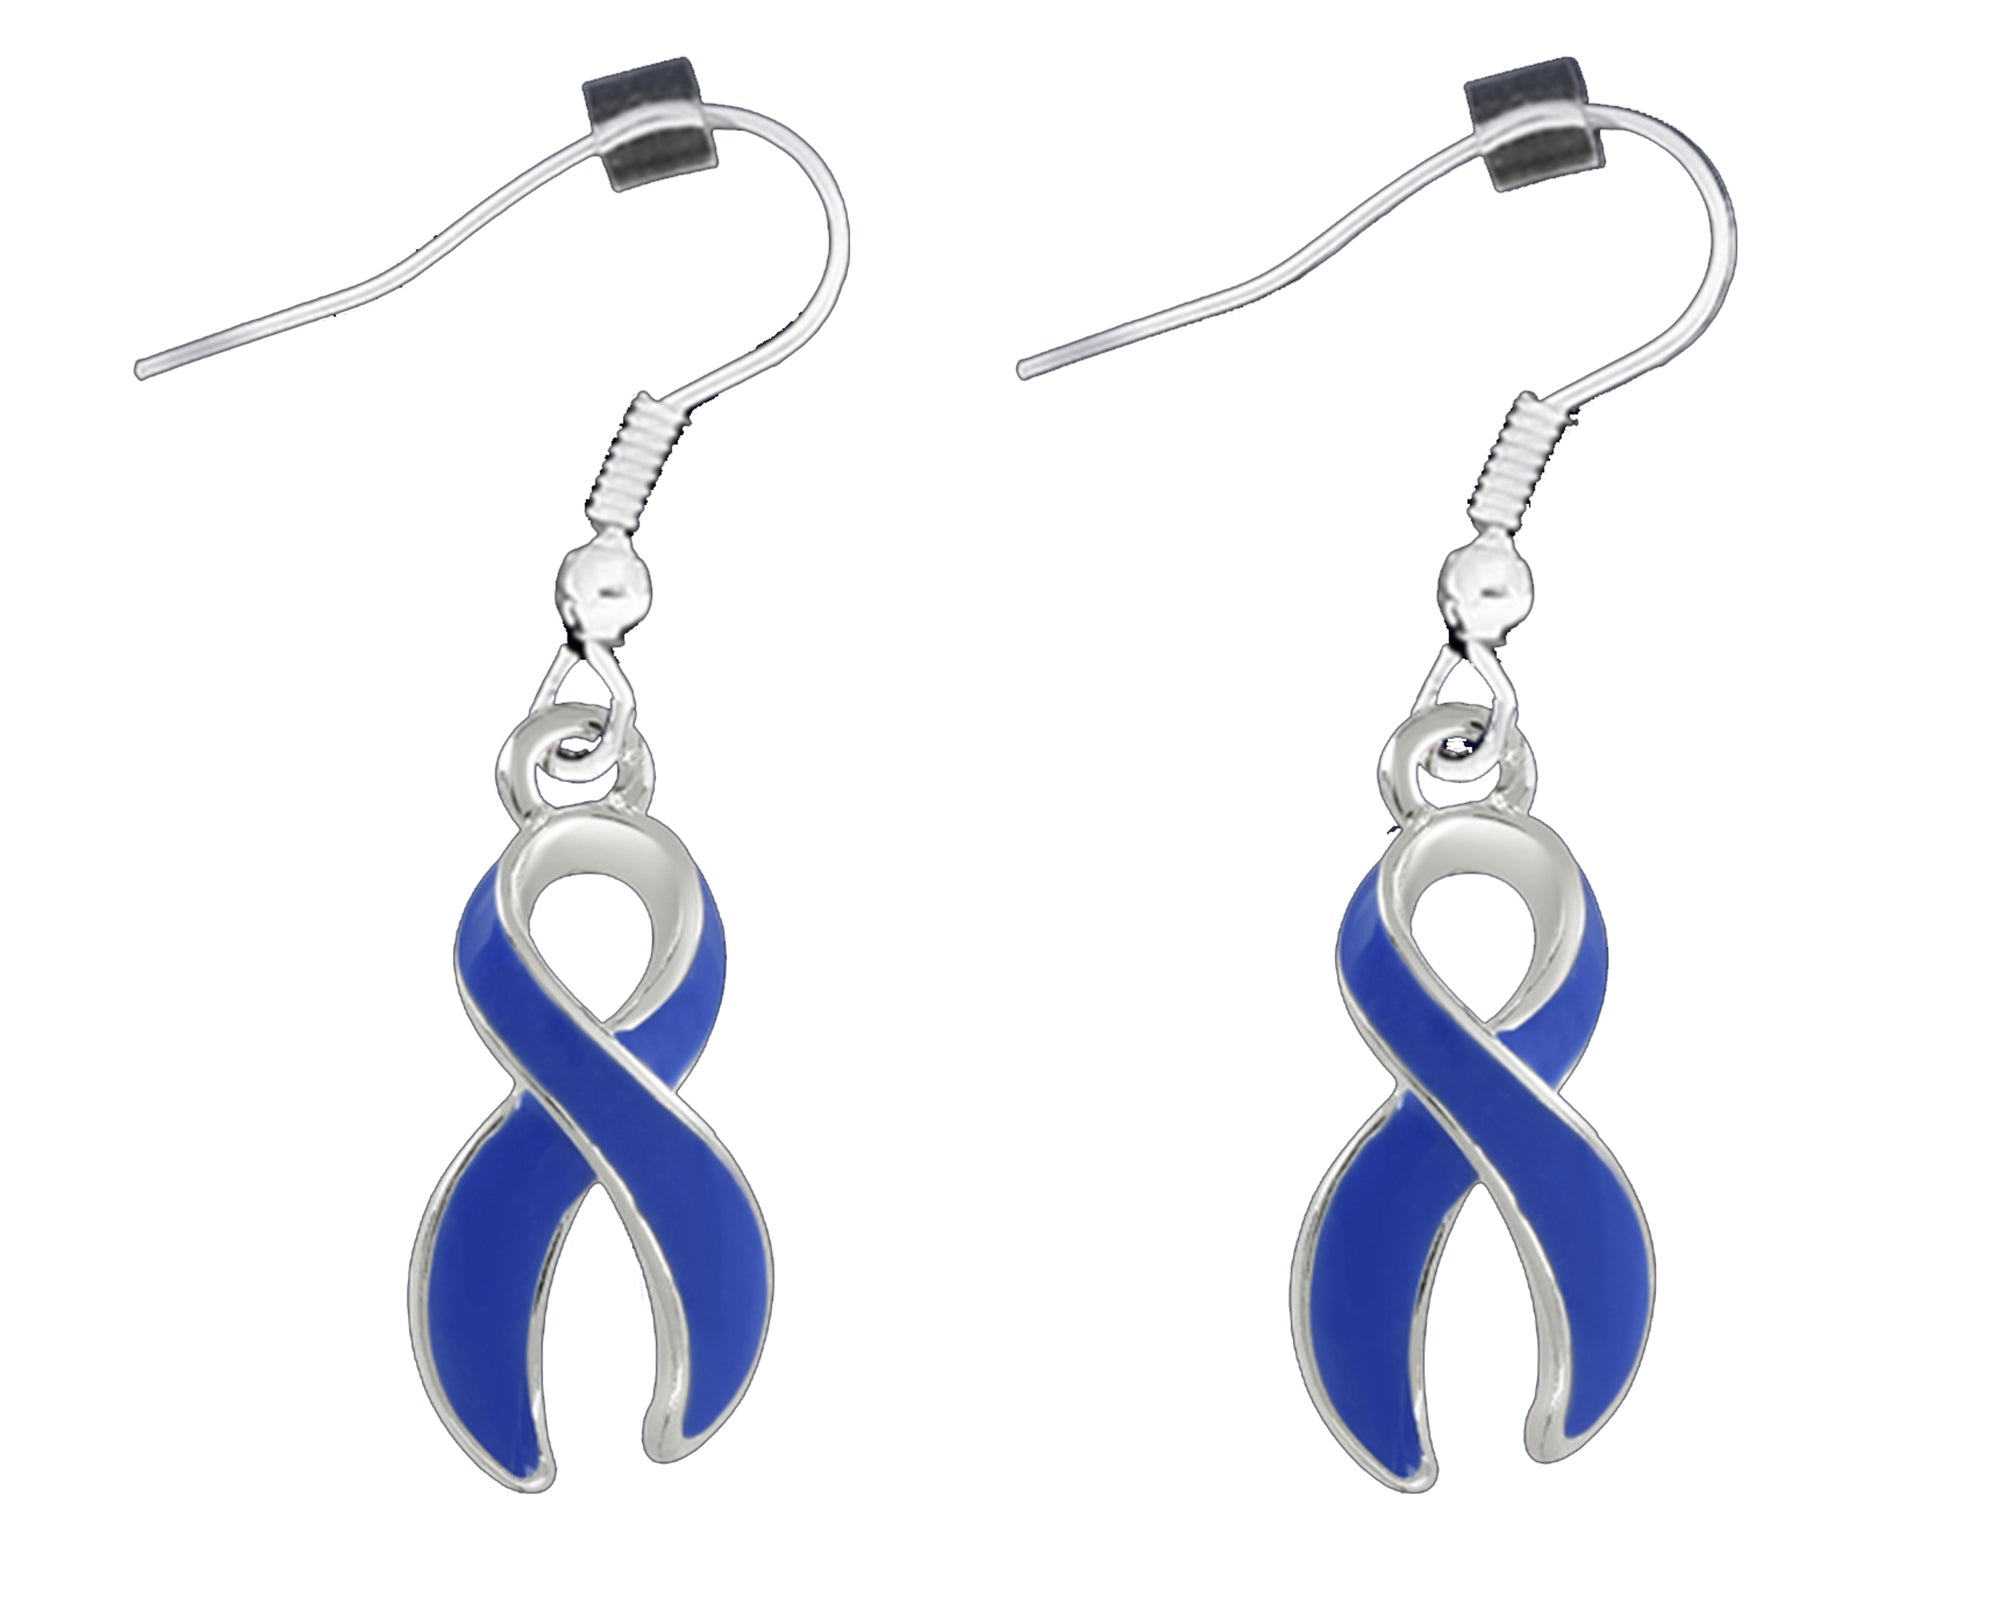 Buy Believe Dark Blue Ribbon Awareness Lapel Pins for Colon Cancer, Child  Abuse, Arthritis Fundraising, Gift Giving Bulk Quantities Available Online  in India 